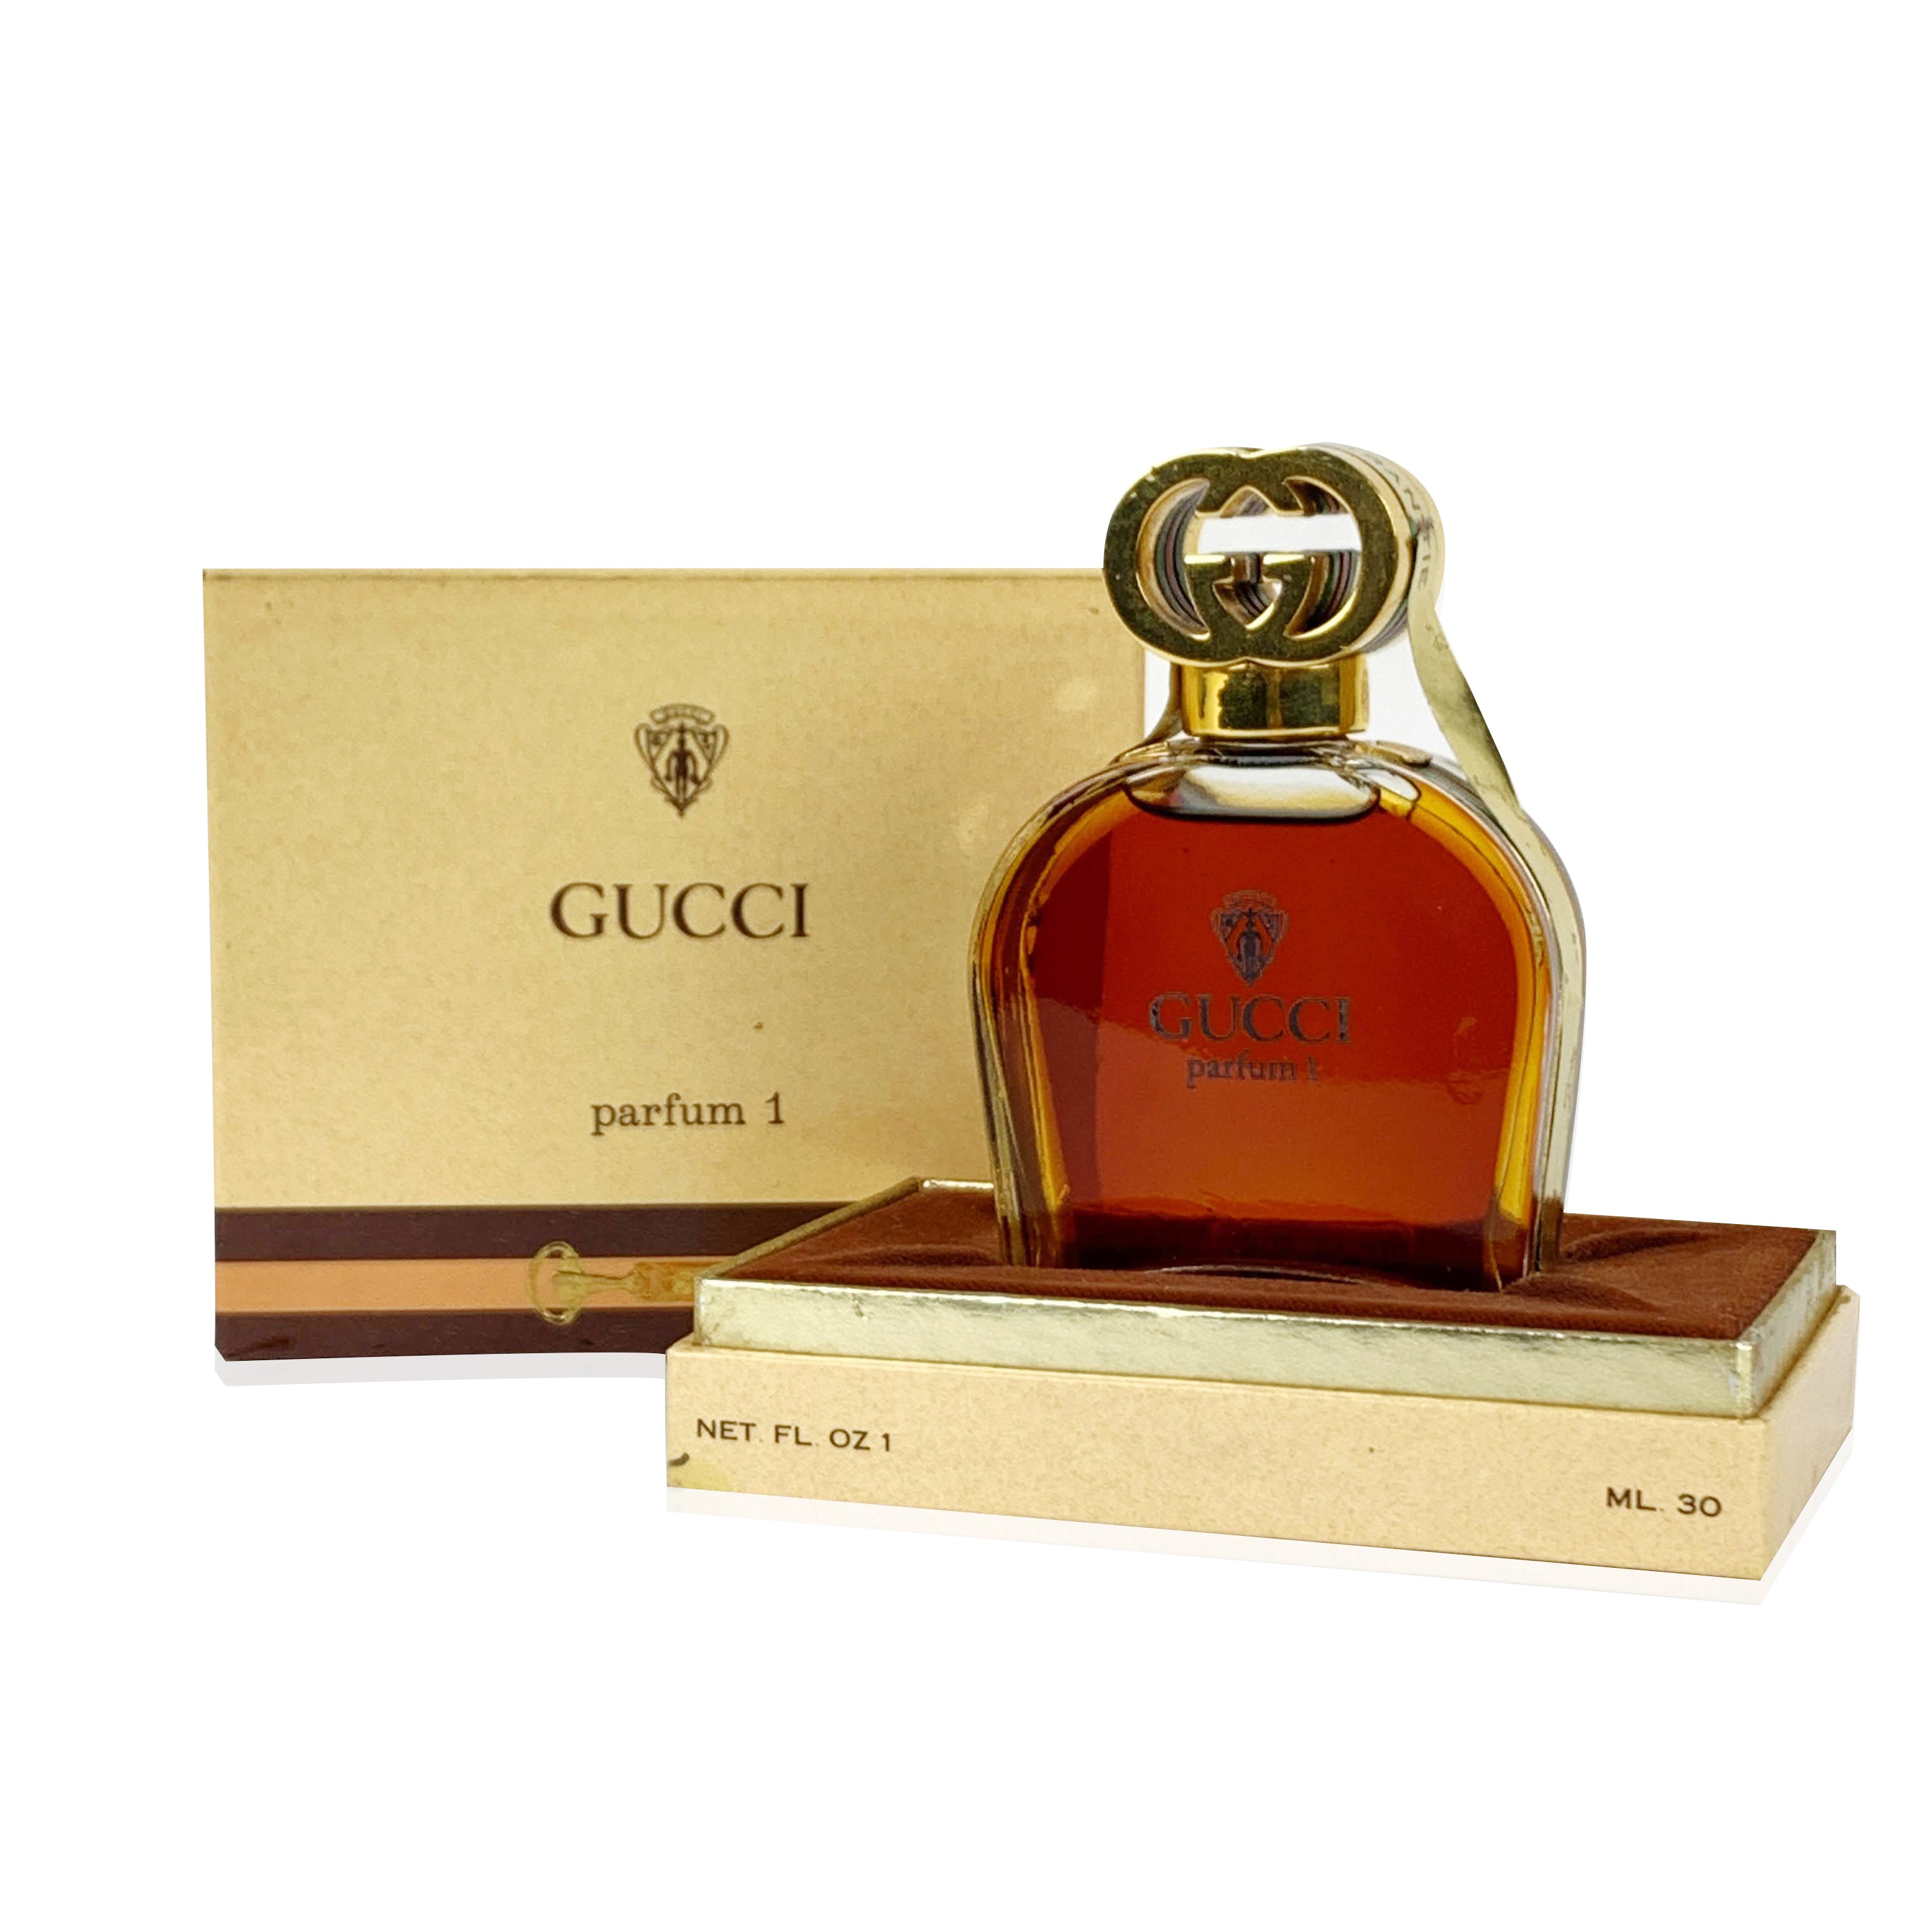 gucci number 1 perfume